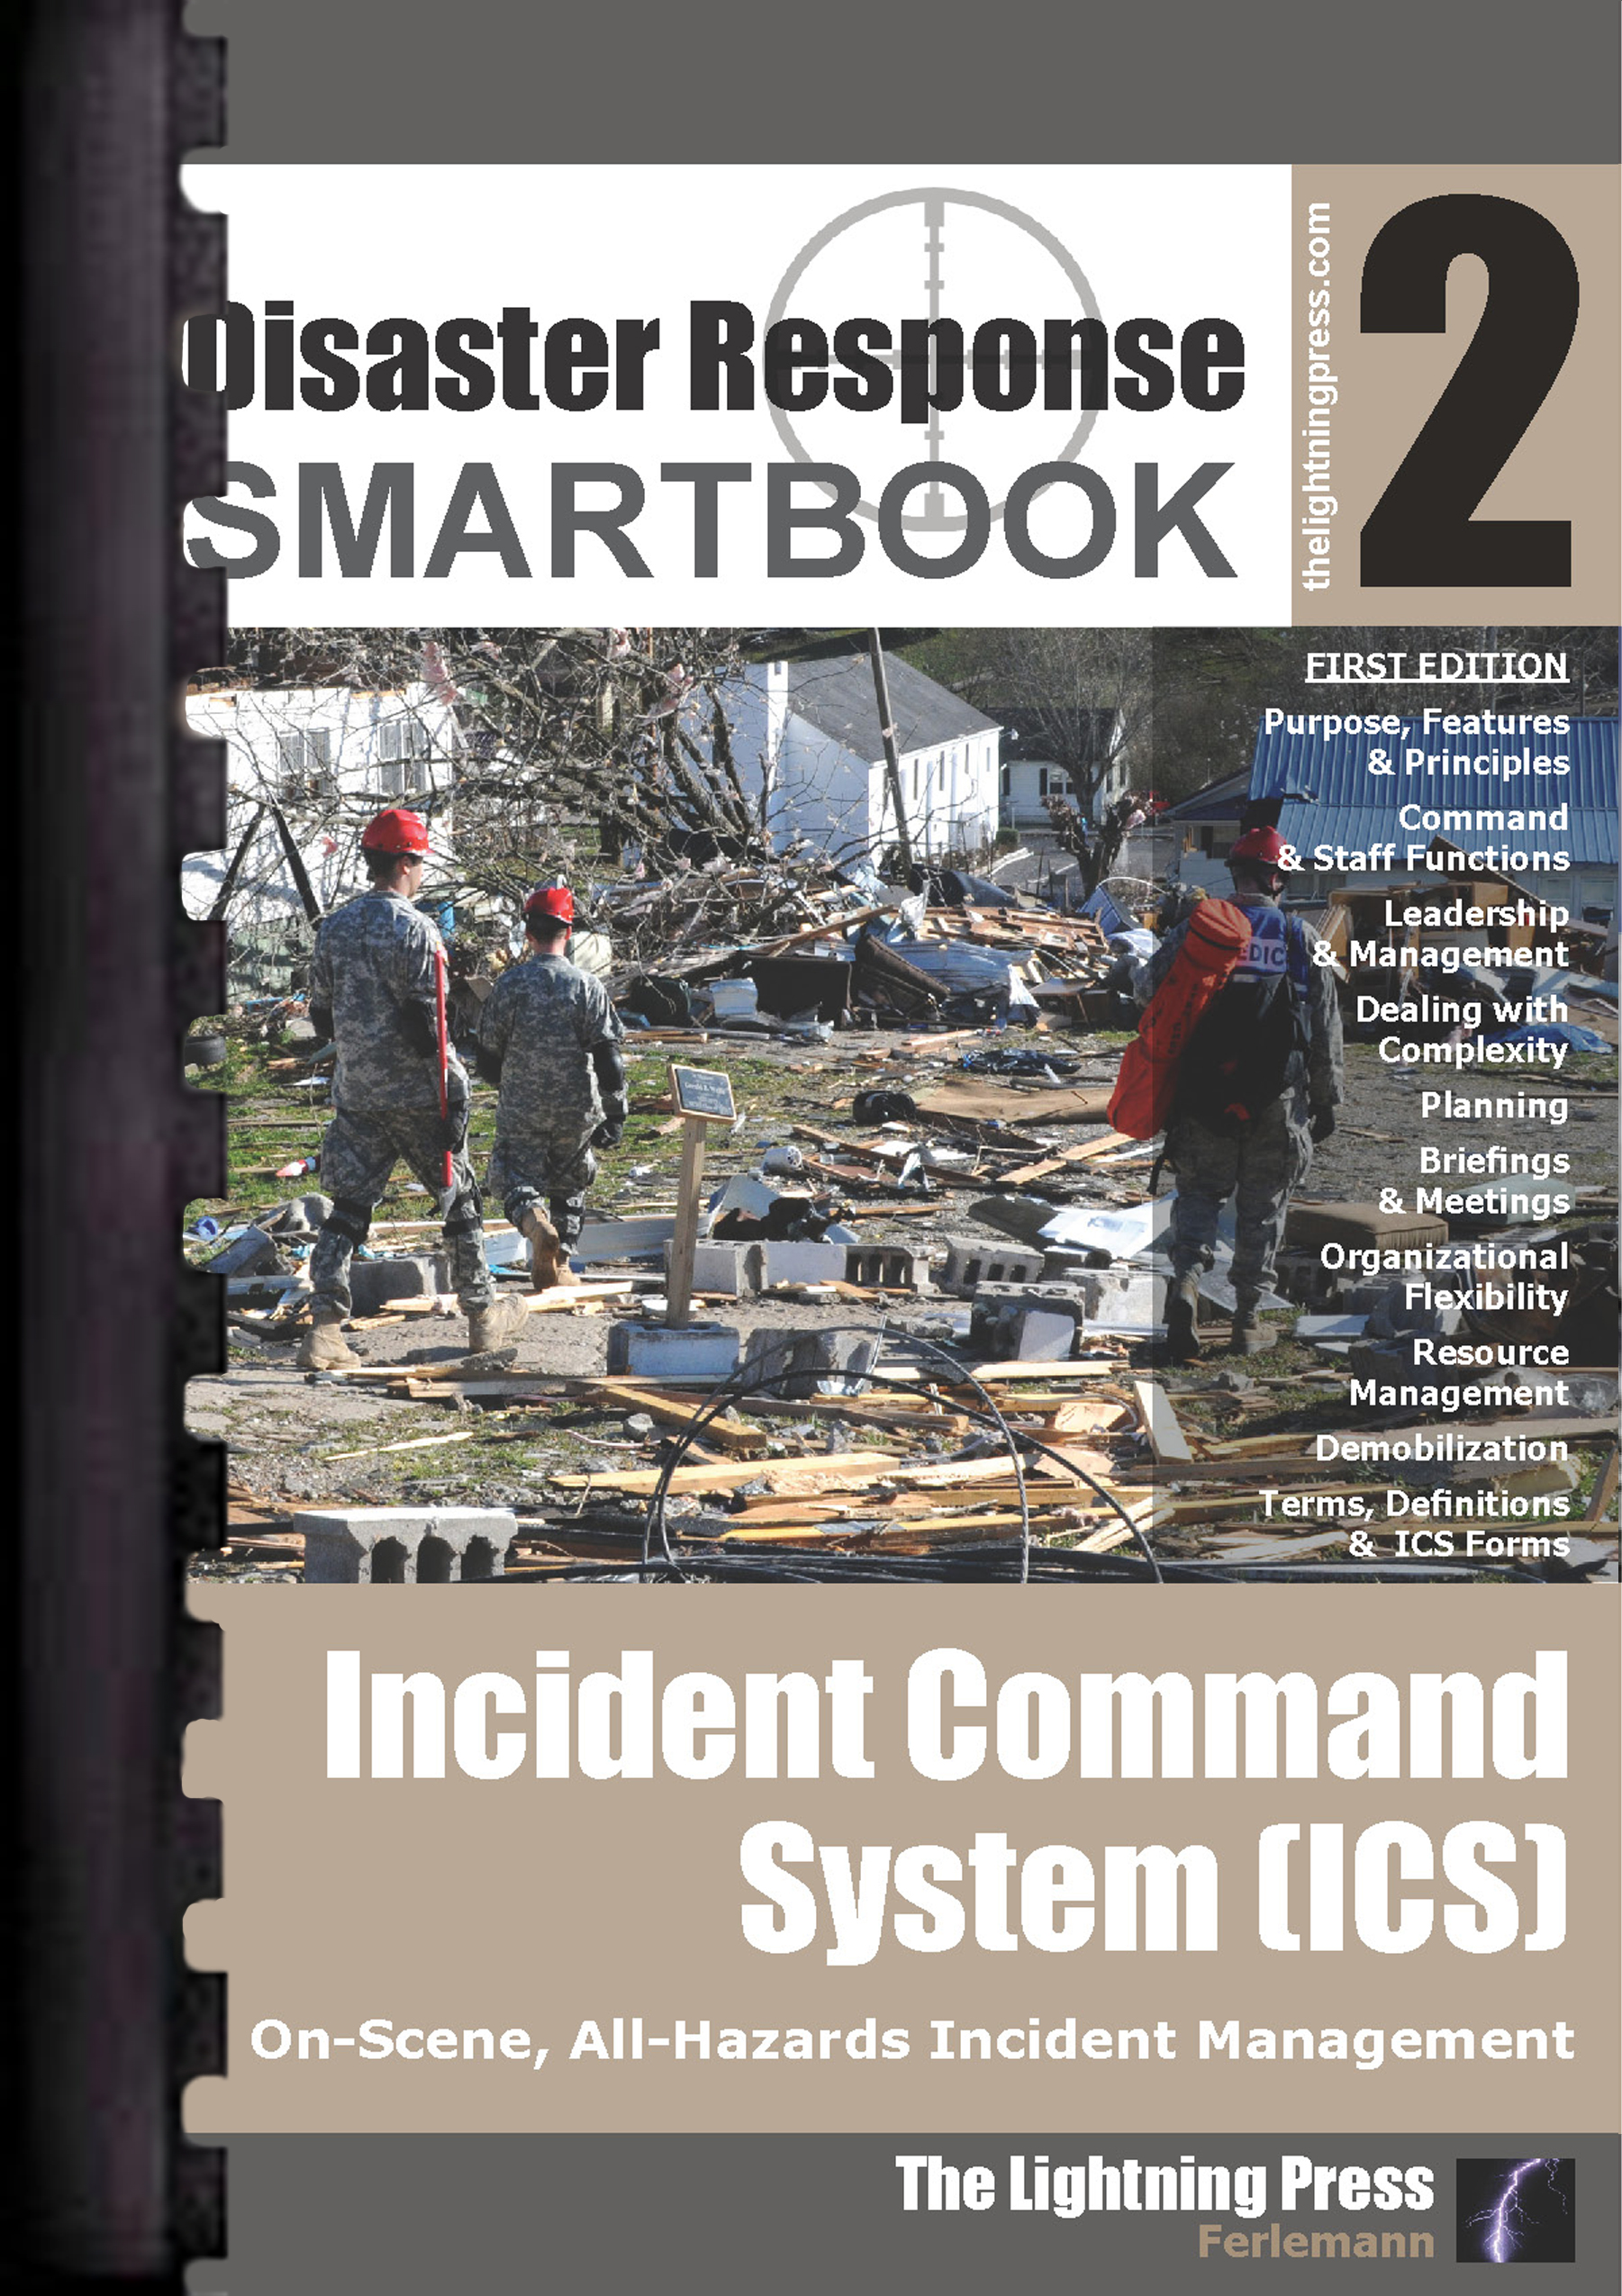 Disaster Response SMARTbook 2 – Incident Command System (ICS)